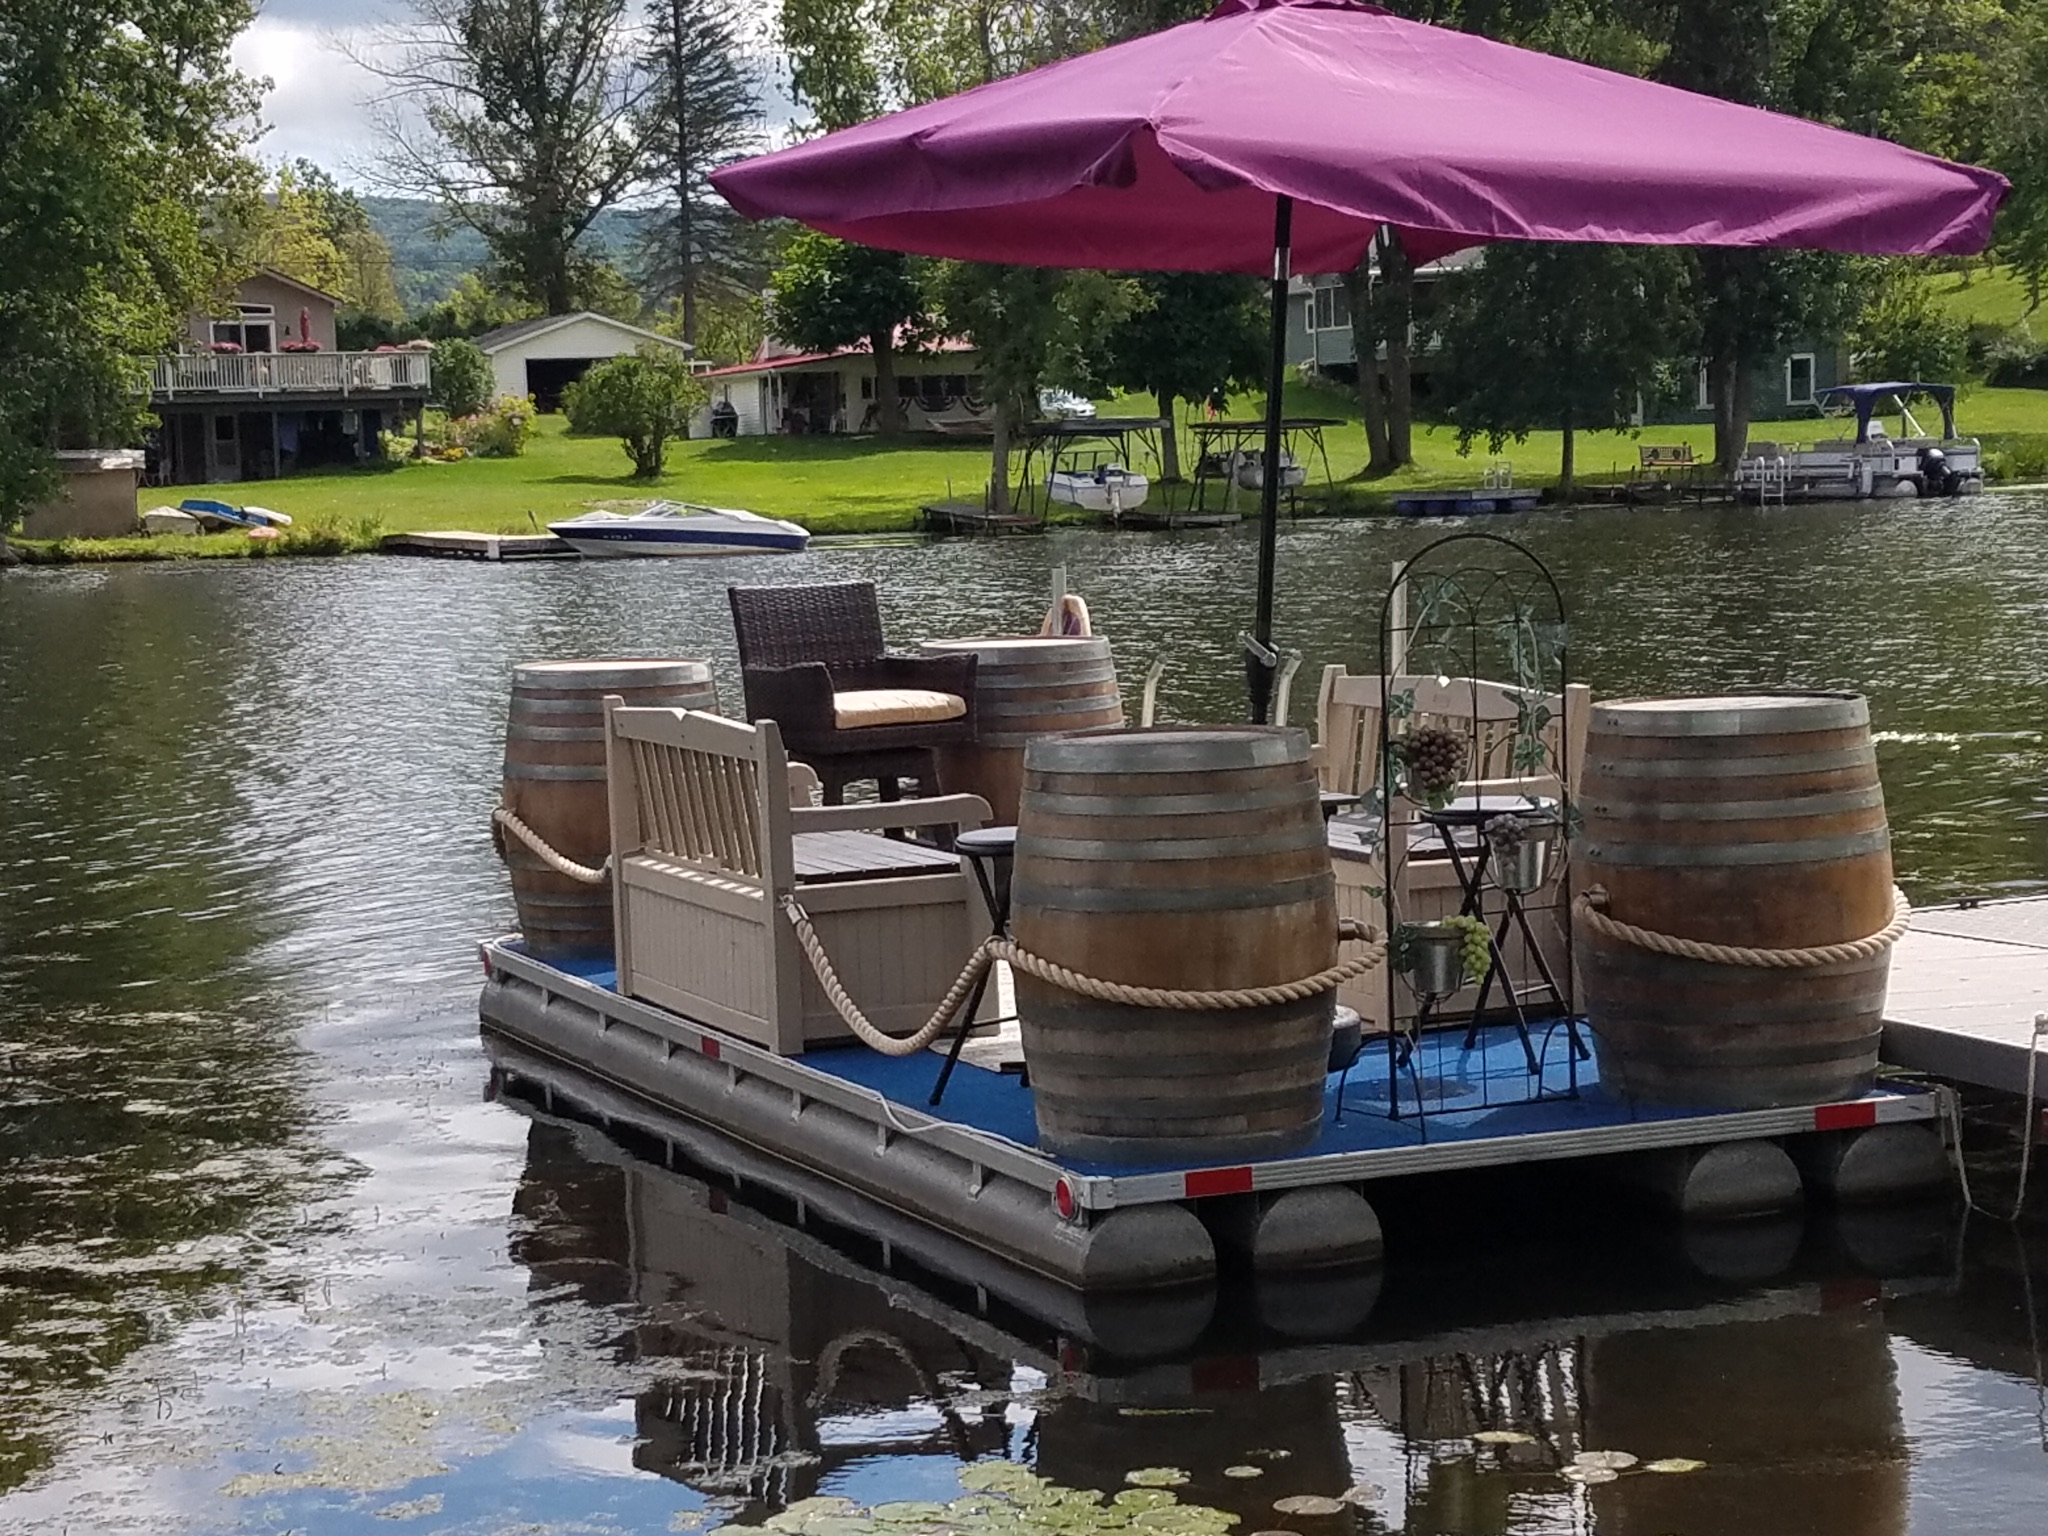 Finger Lakes Wine History Tour and Curated Tasting on FLX Wine Barge